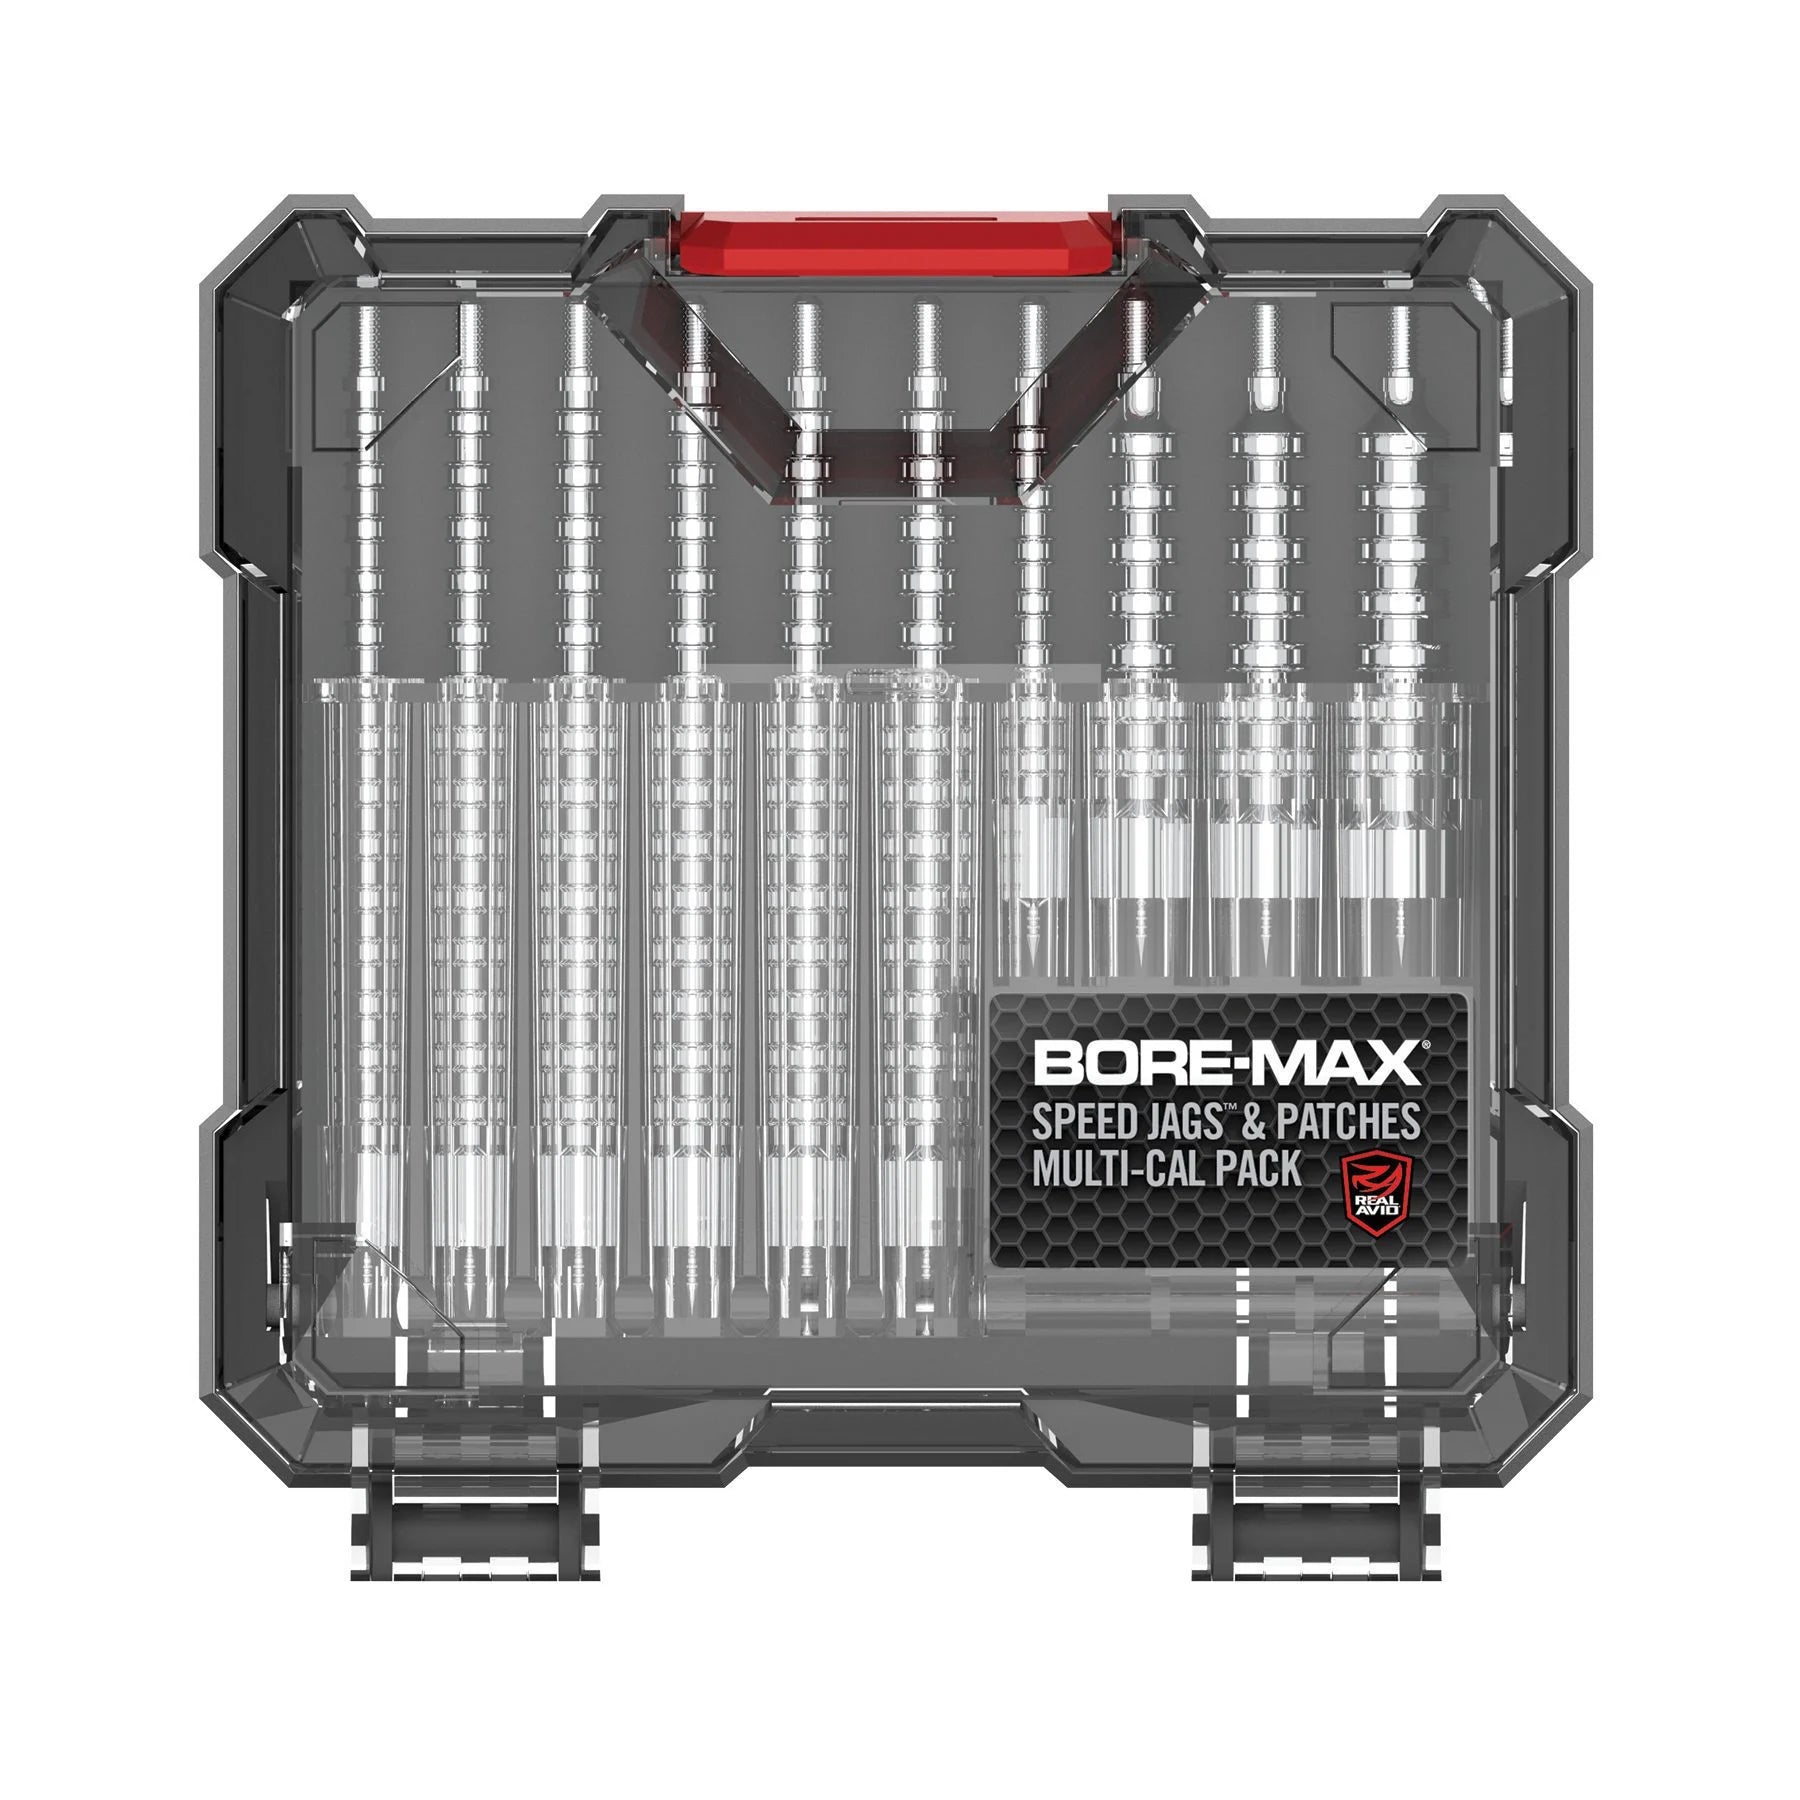 Real Avid Bore-Max Speed Jags & Patches Multi-Cal Pack